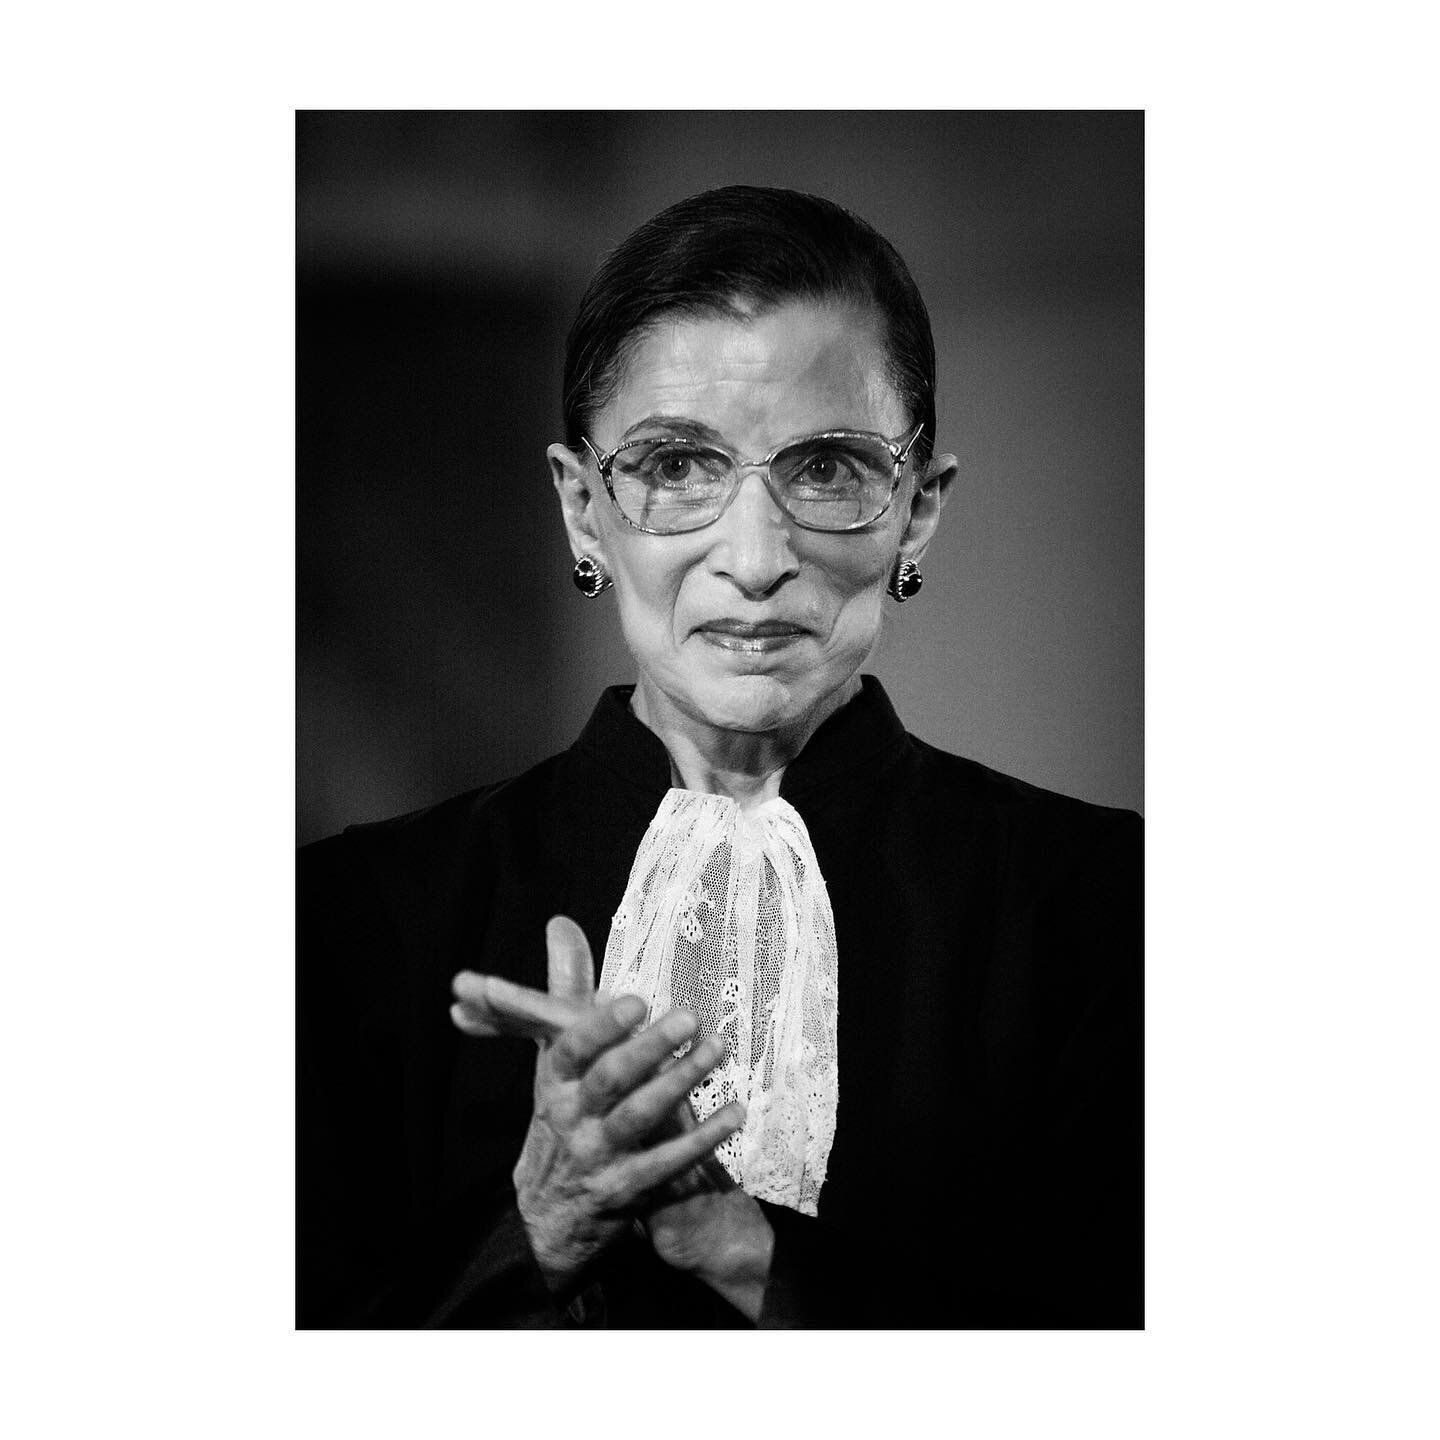 Notorious RBG, RIP. We have some dark times ahead of us 
.
.
.
.
.
.
.
.
.
.
.
#roevswade #notoriousrbg #roevswade #ruthbaderginsburg #ruthb #progress #supremecourtjustice #supremecourt #america #rights